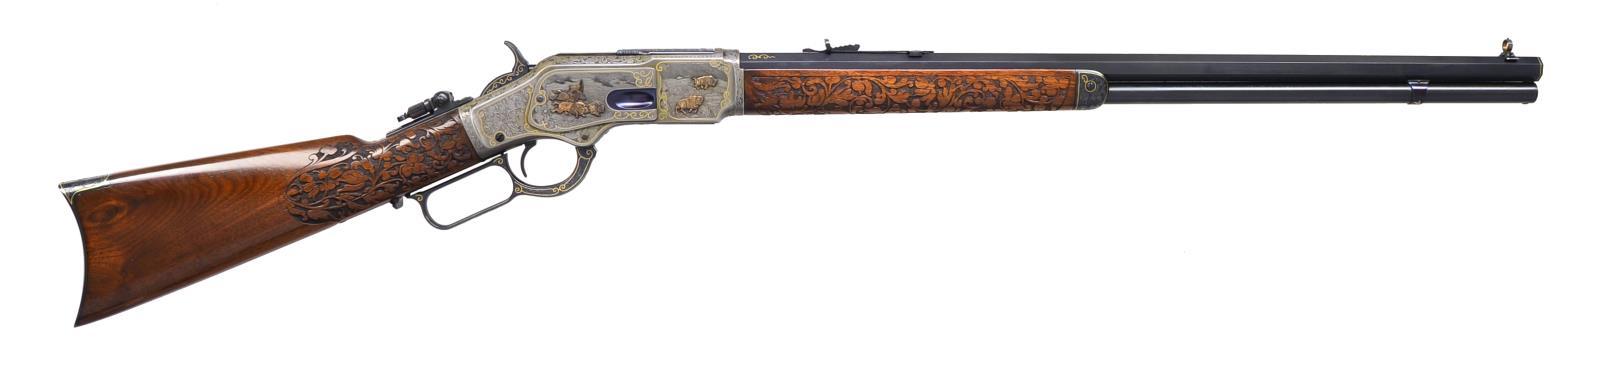 CUSTOM ENGRAVED WINCHESTER 1873 BY EMMA